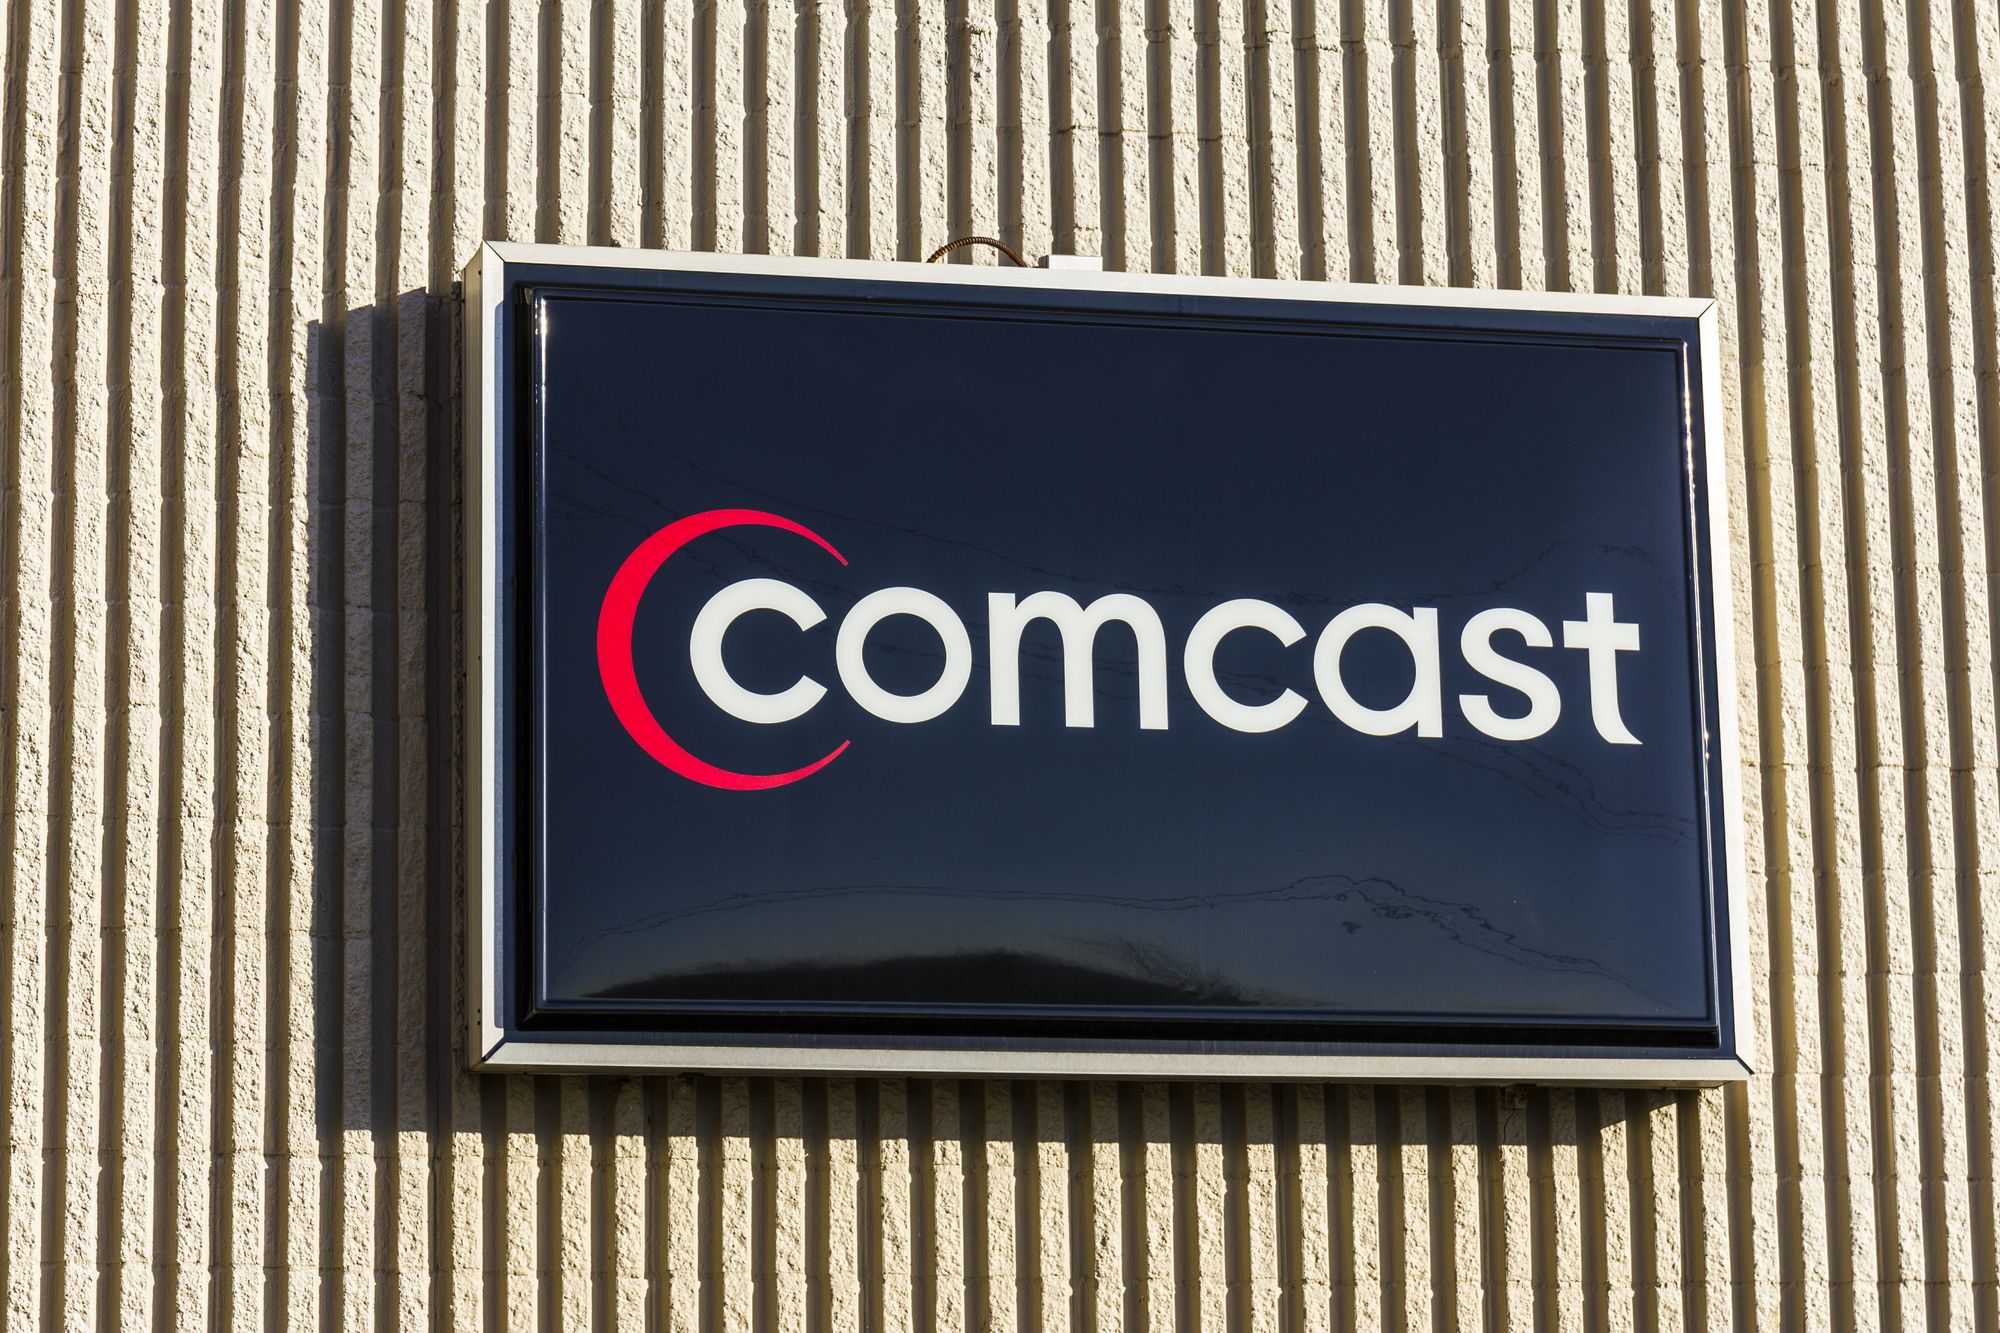 Comcast Class Action Says Company Runs Credit Reports Without Consent